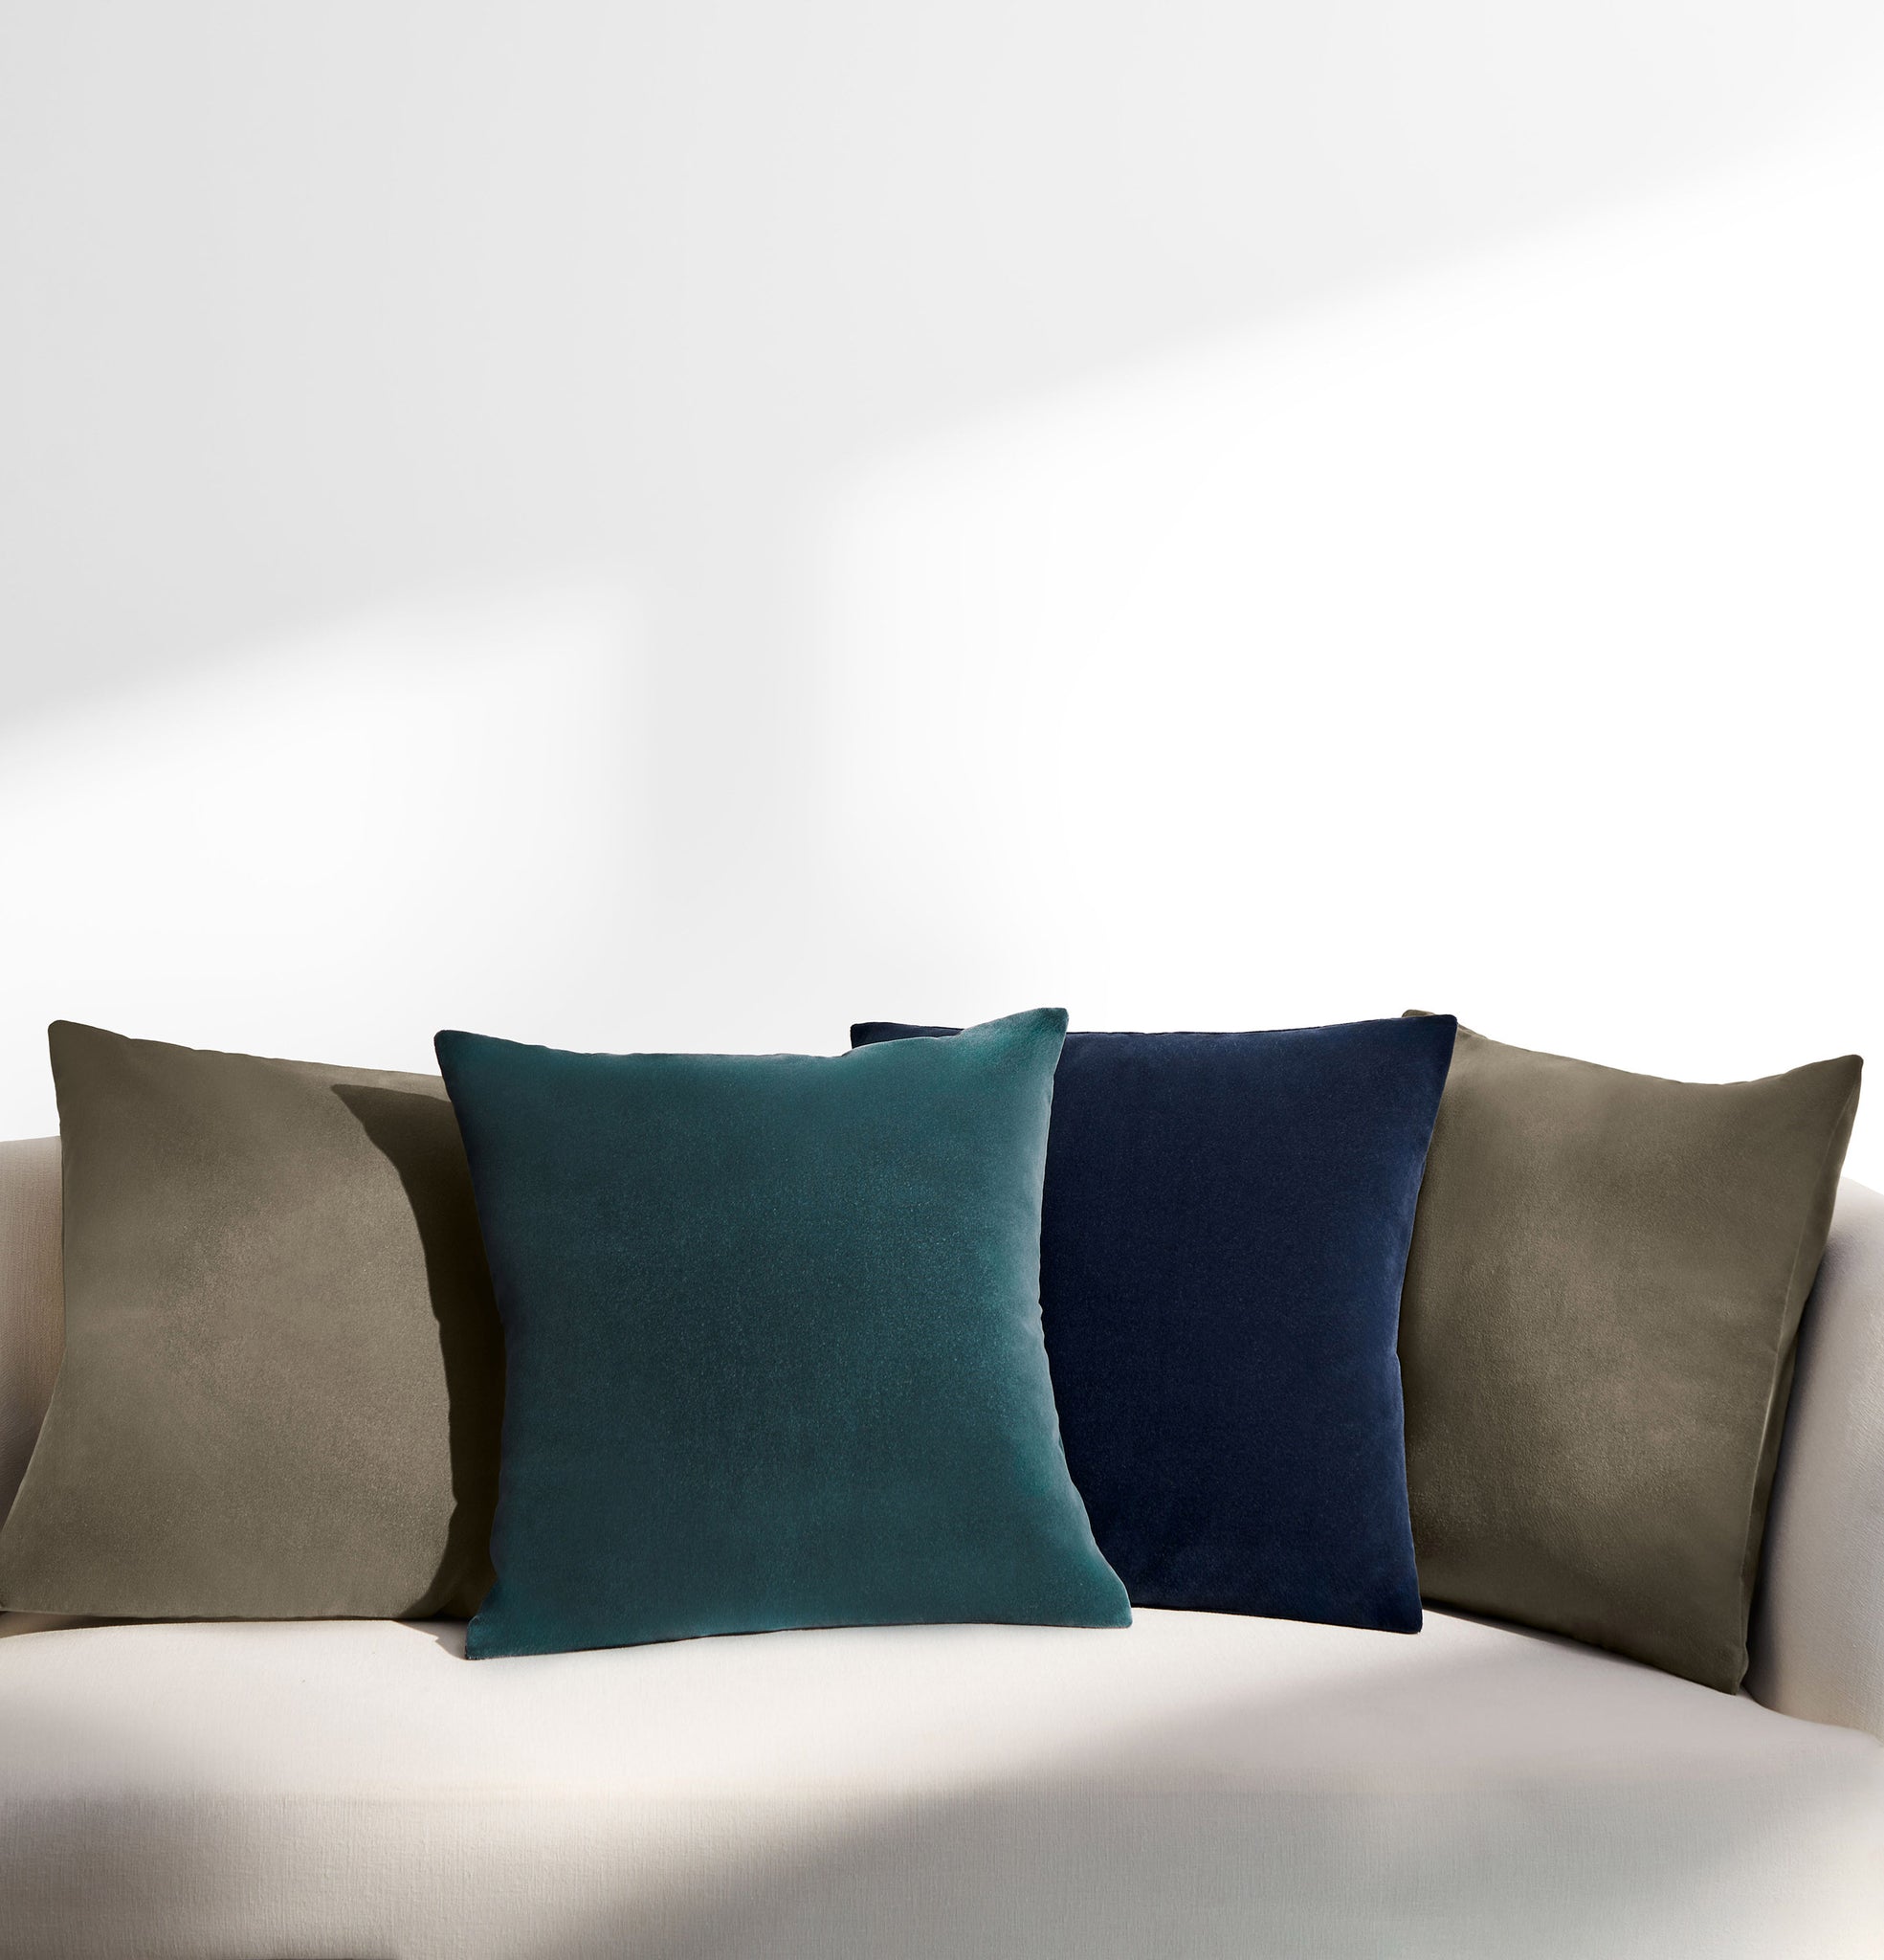 Teal, blue and green cushions on sofa